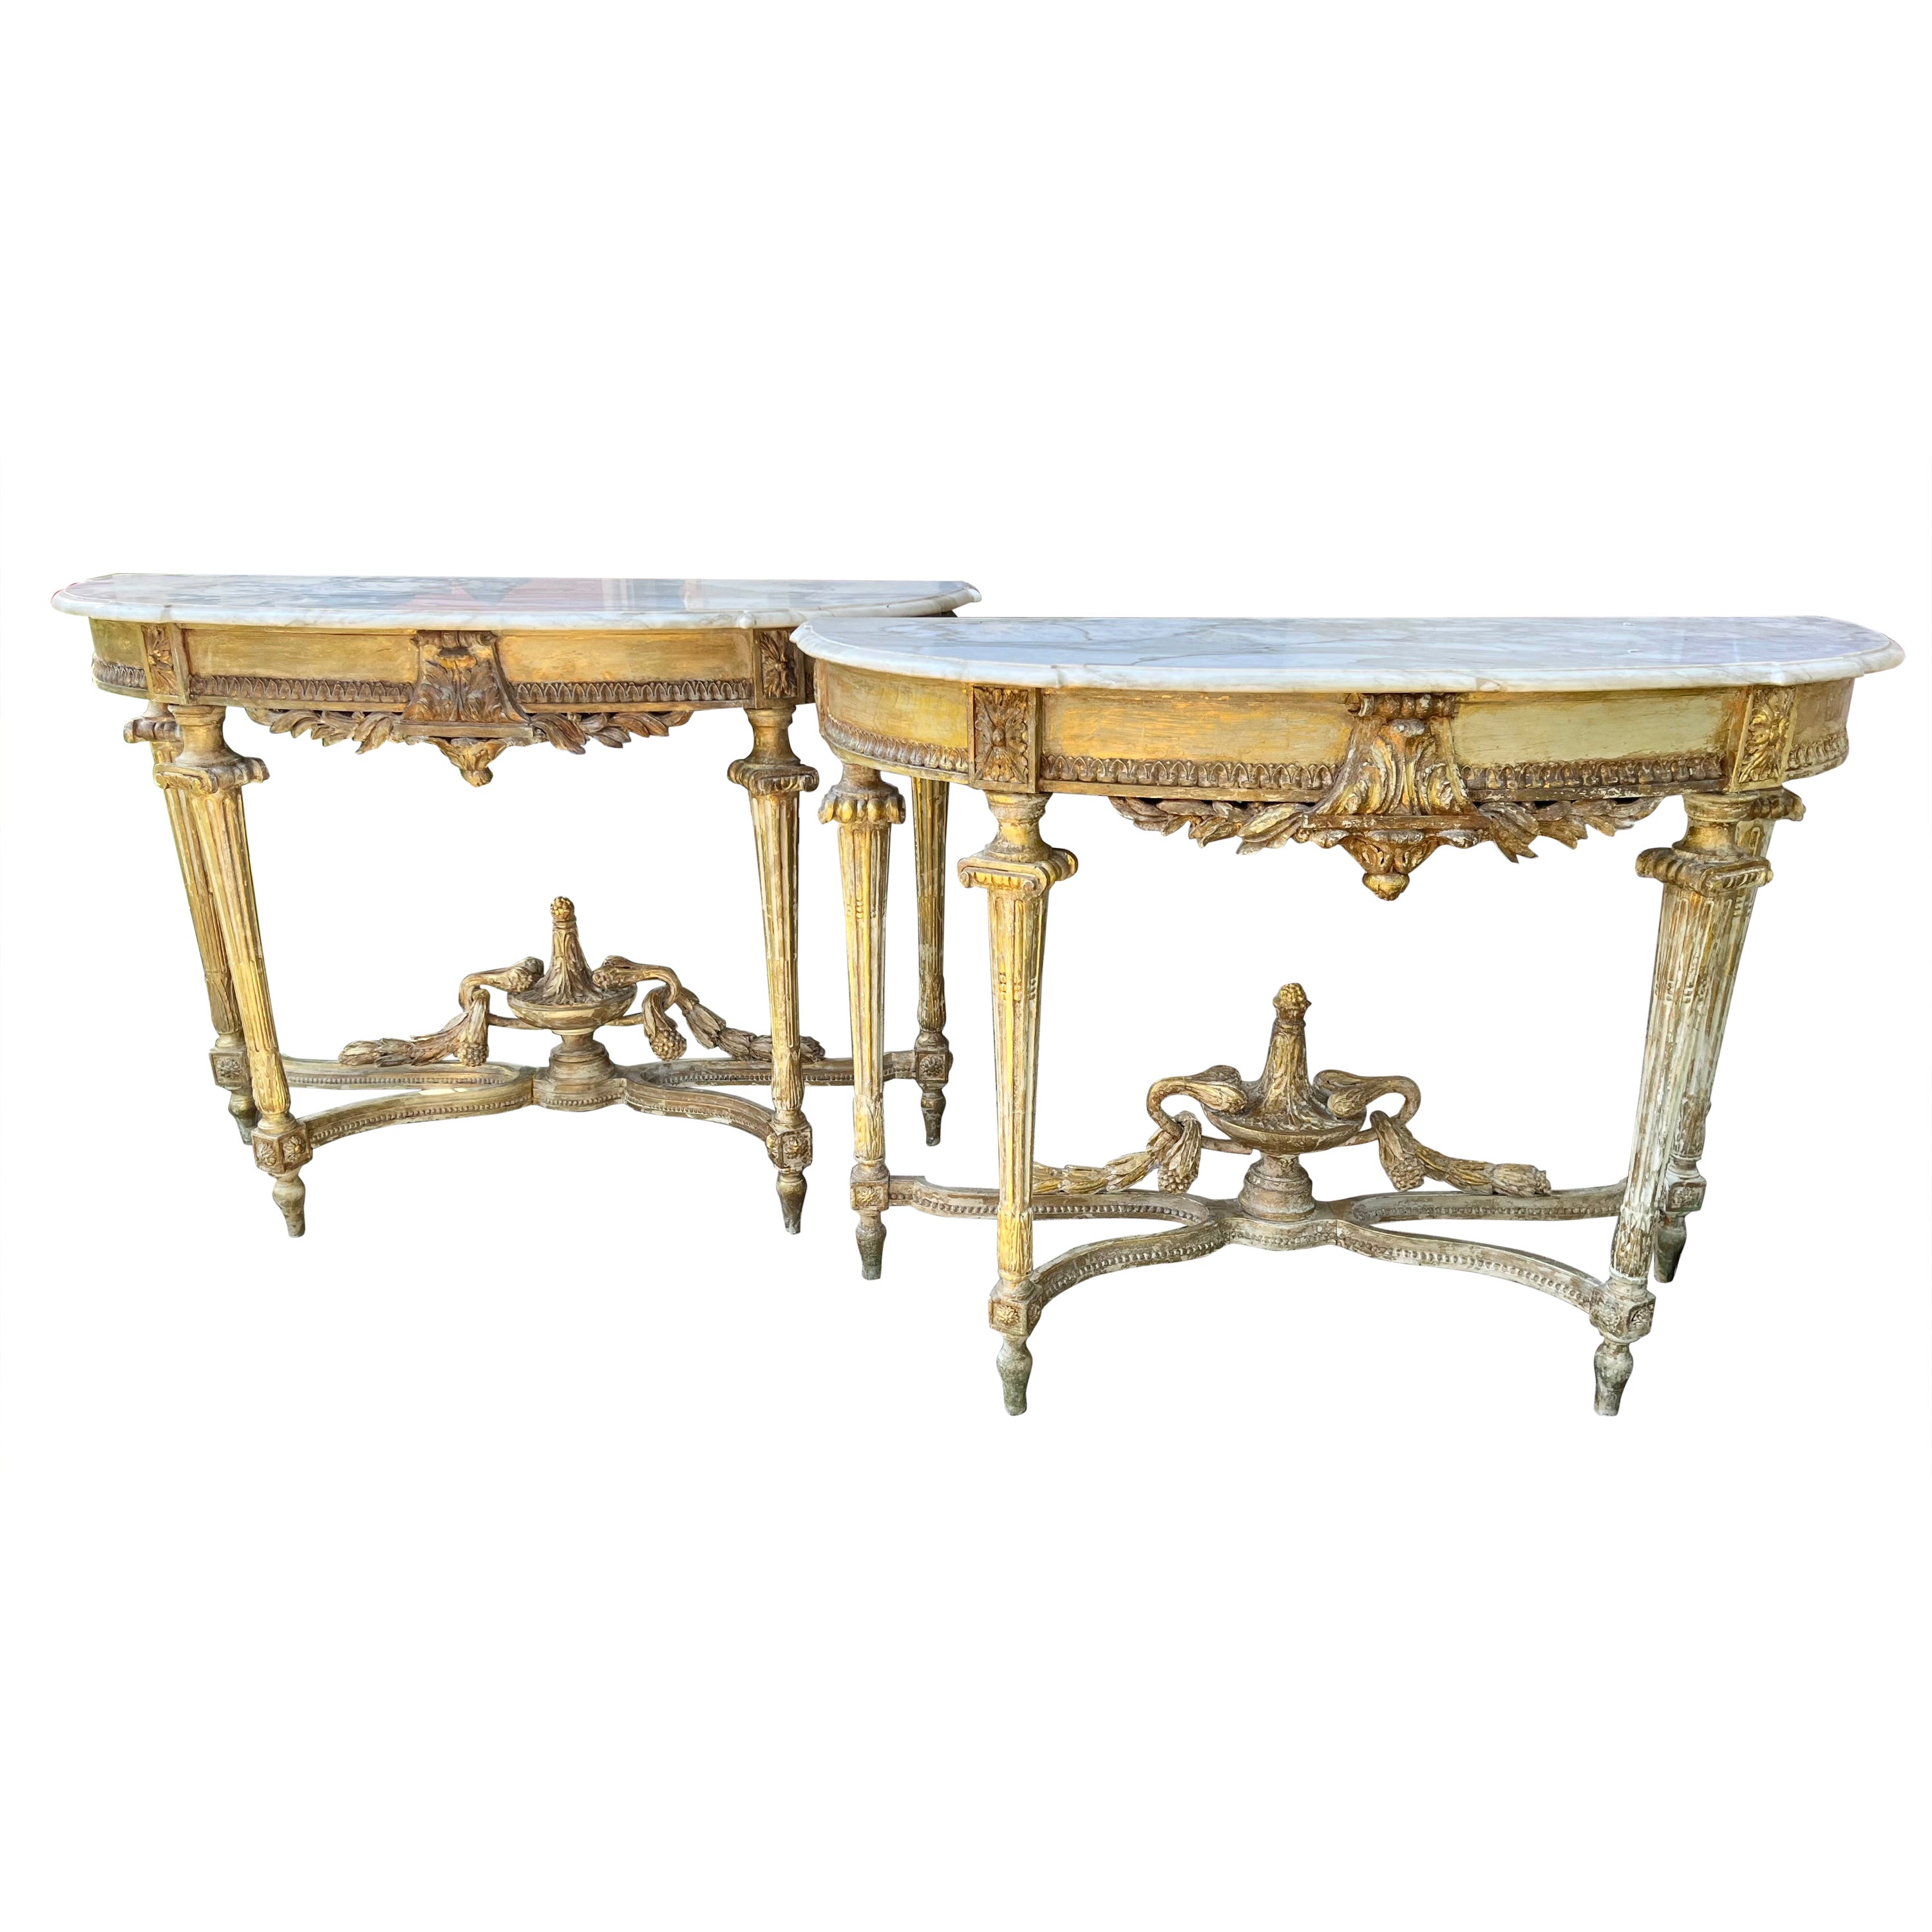 Pair Of Louis XVI Style Distressed Paint and Parcel Gilt Marble Topped Consoles